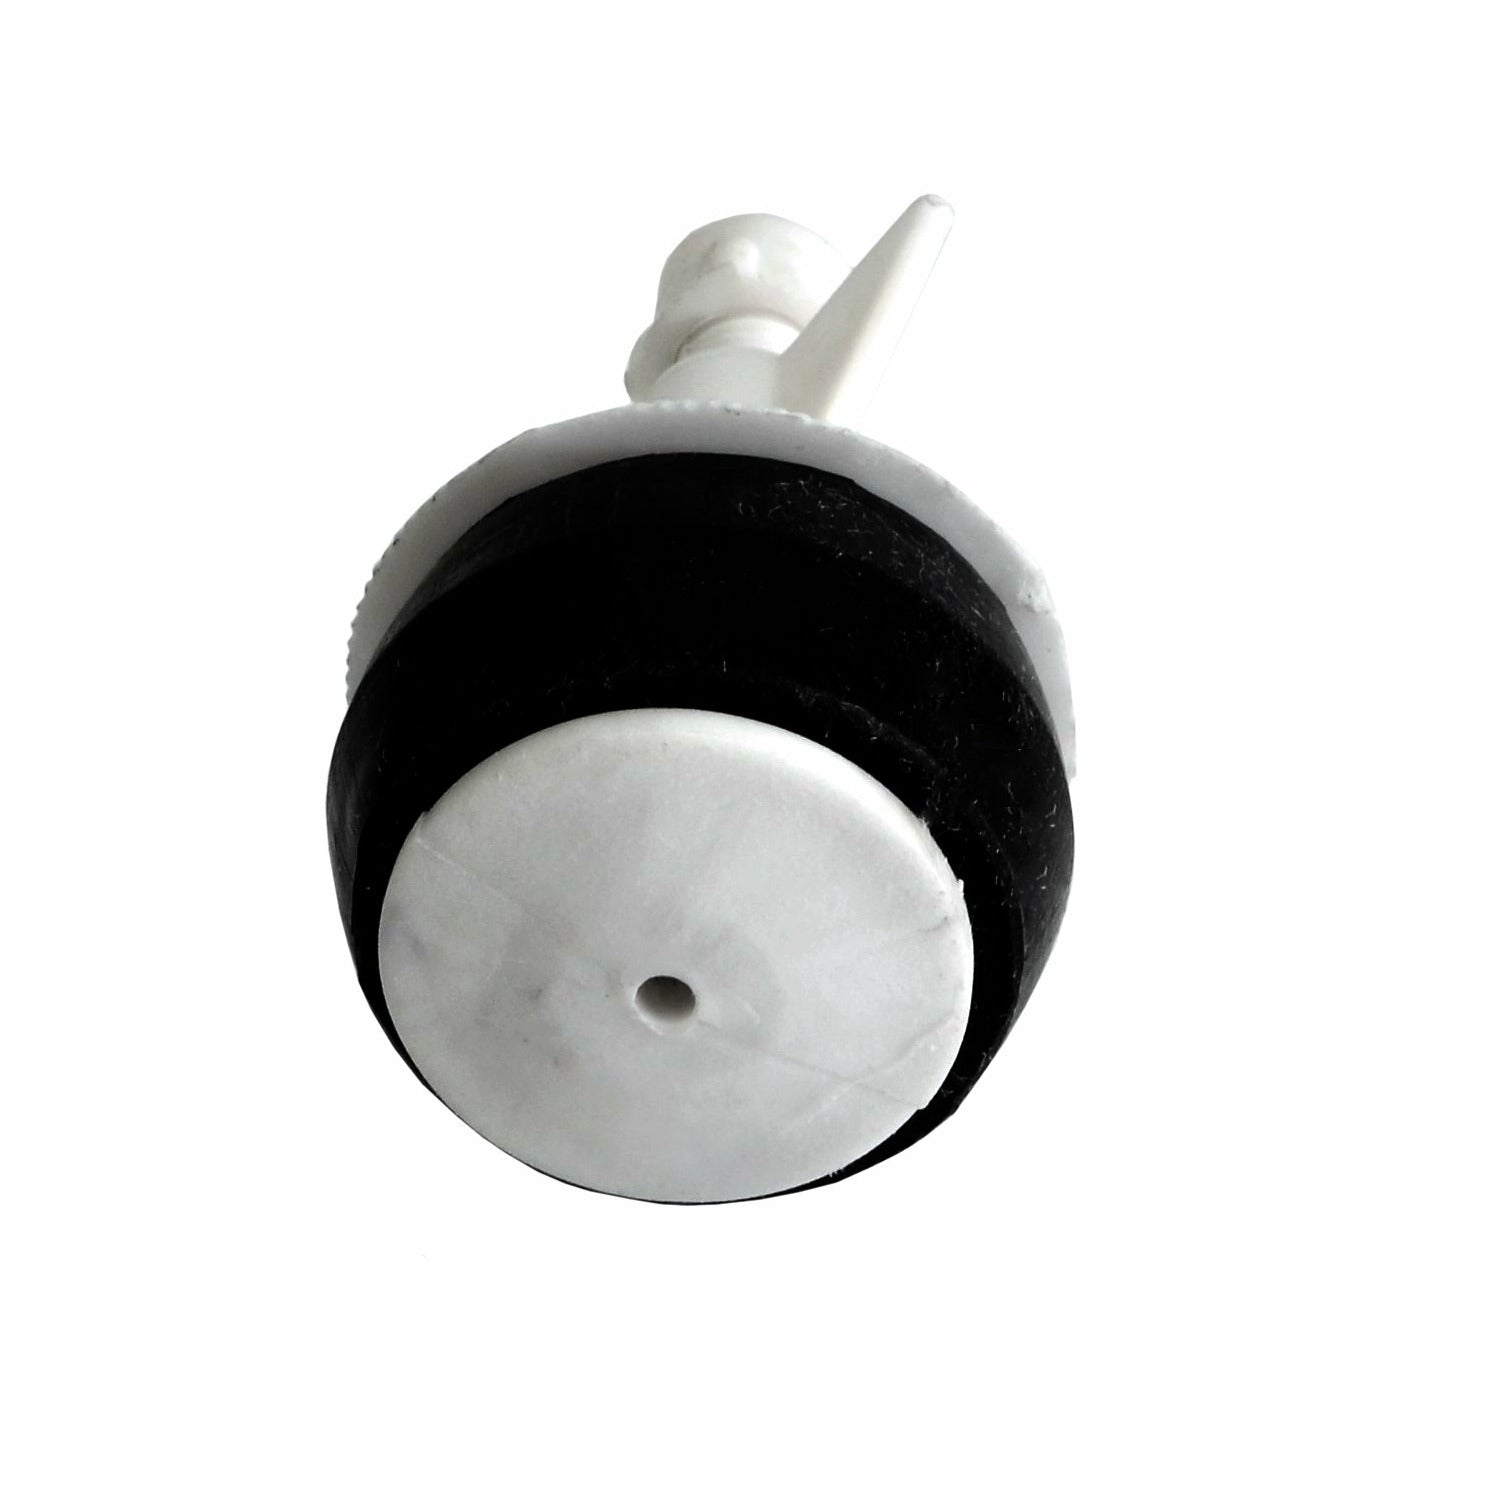 Nylon Mechanical Pipe Test plug bung with 10mm bypass 36mm to 45mm